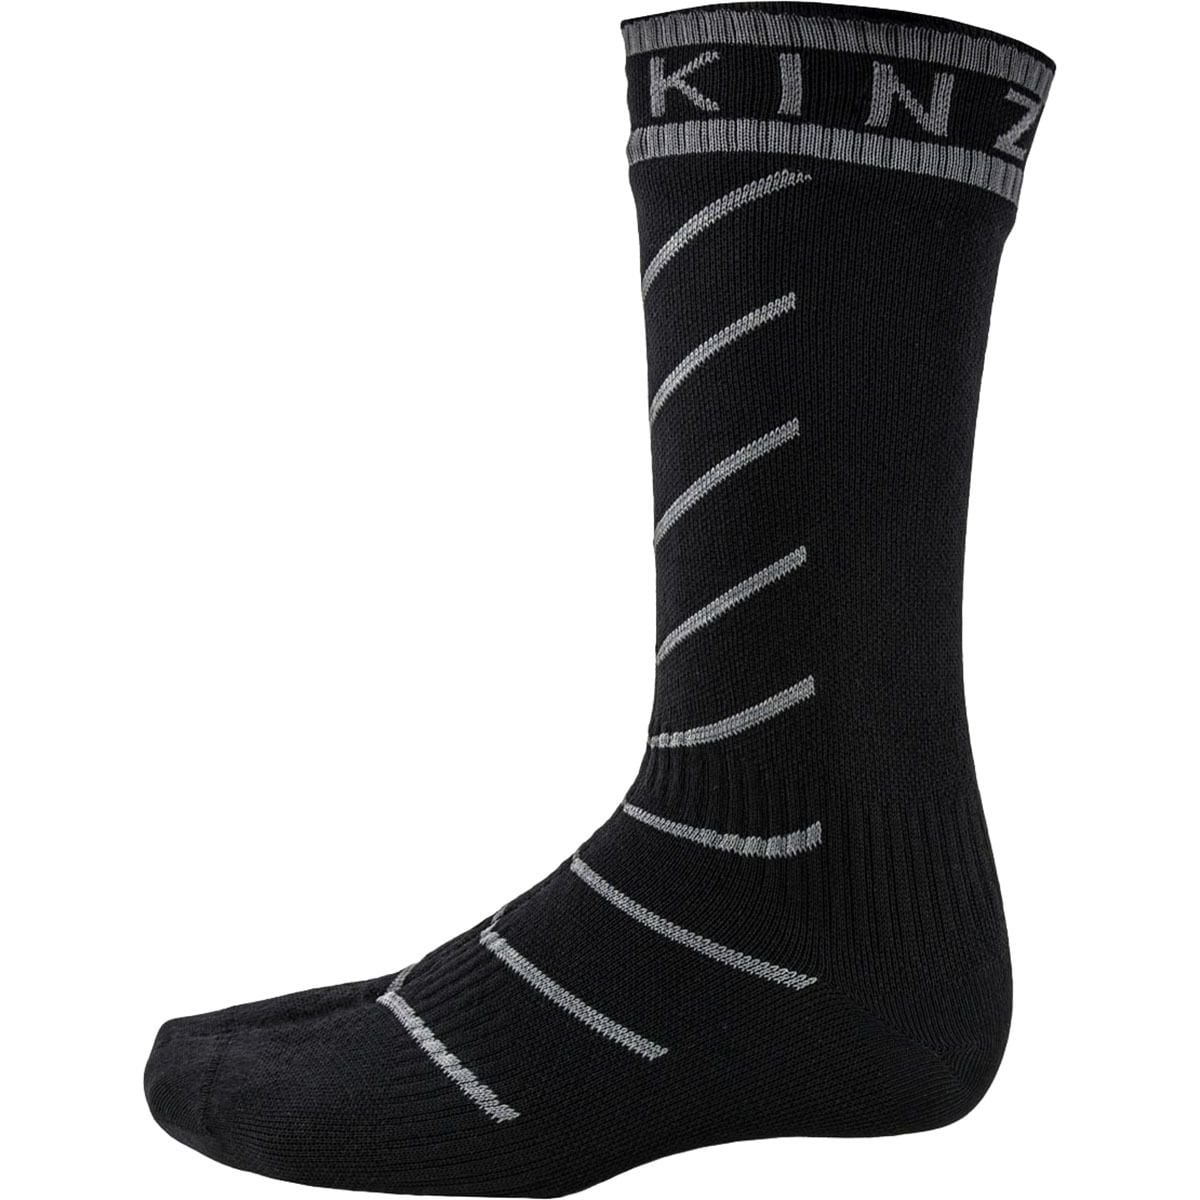 SealSkinz Super Thin Pro Mid Sock With Hydrostop - Men's